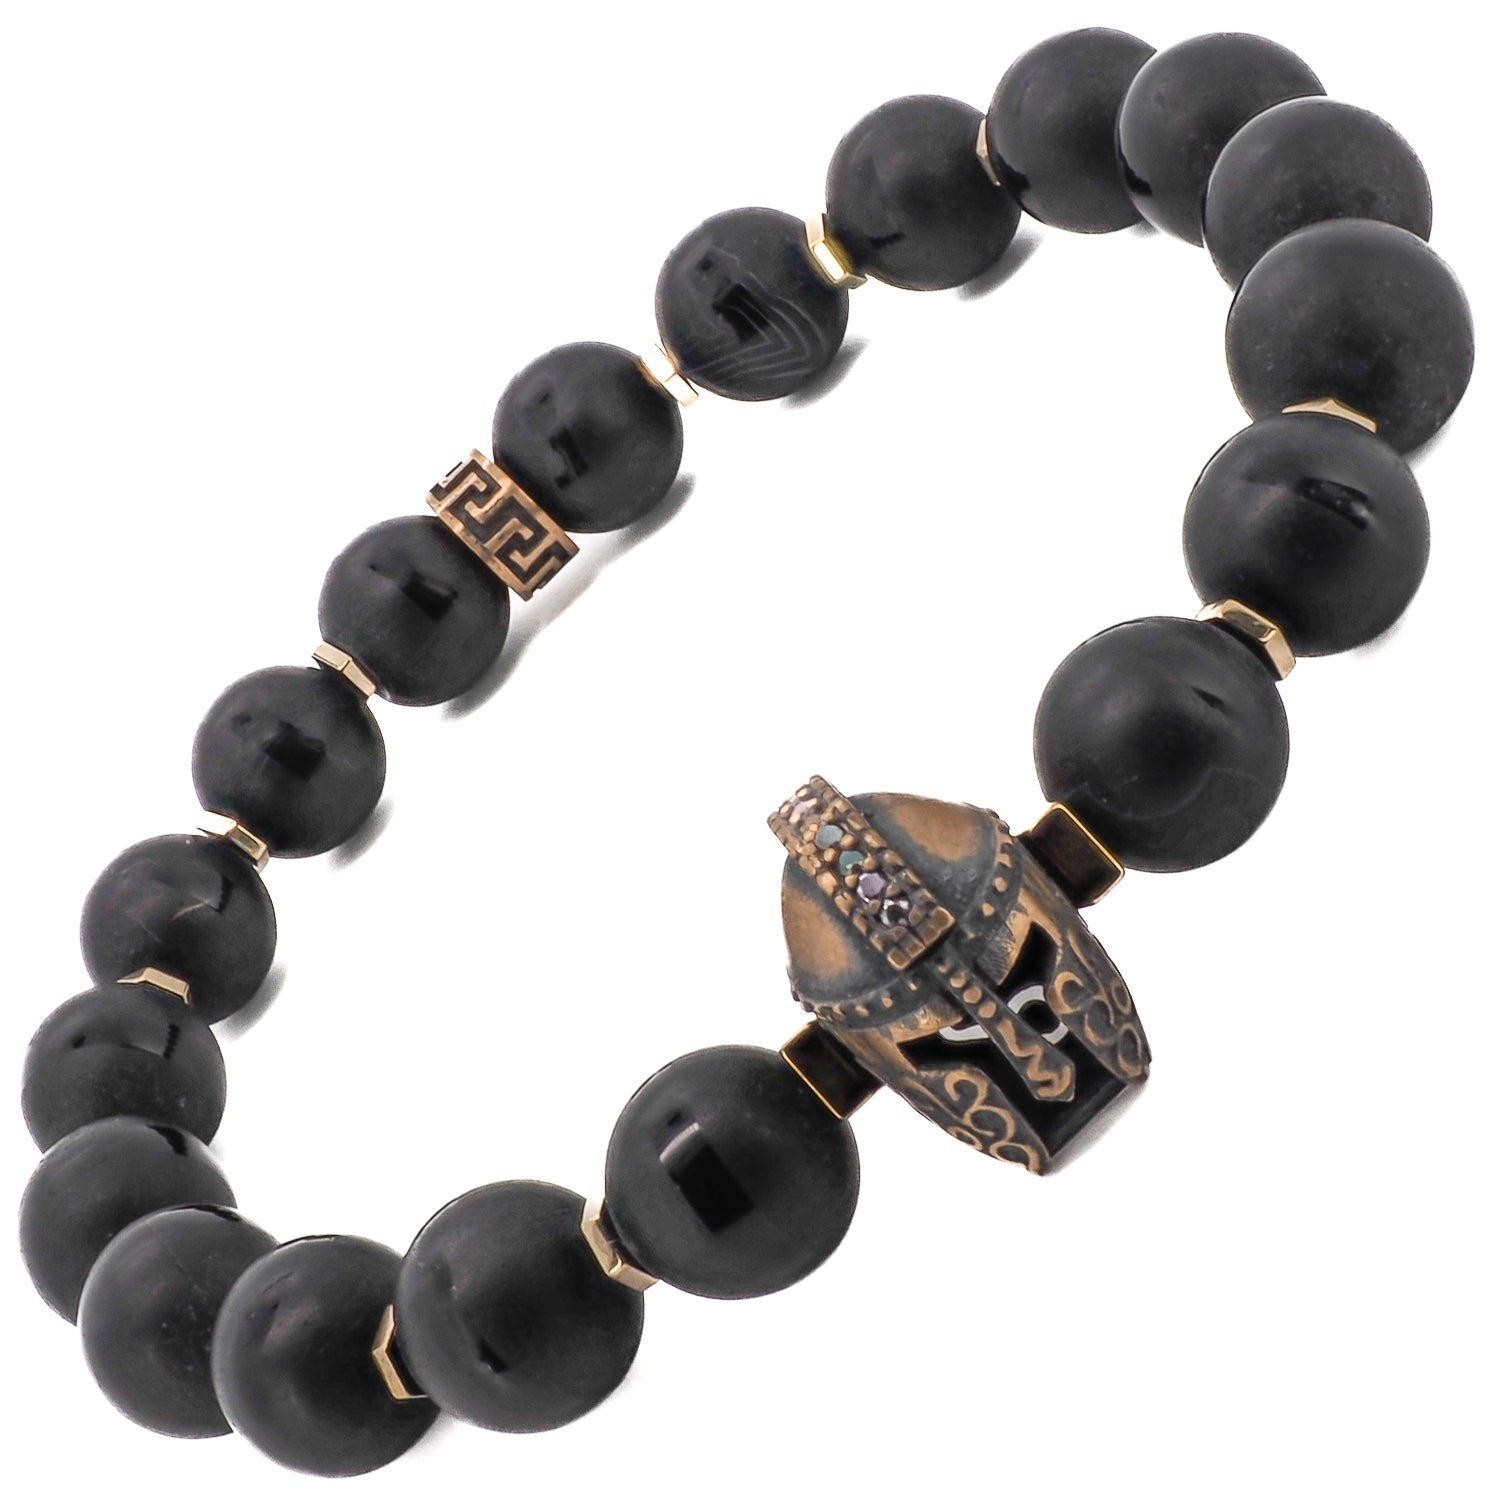 Black Onyx Crystal resonates with the root chakra, providing powerful protection and happiness.